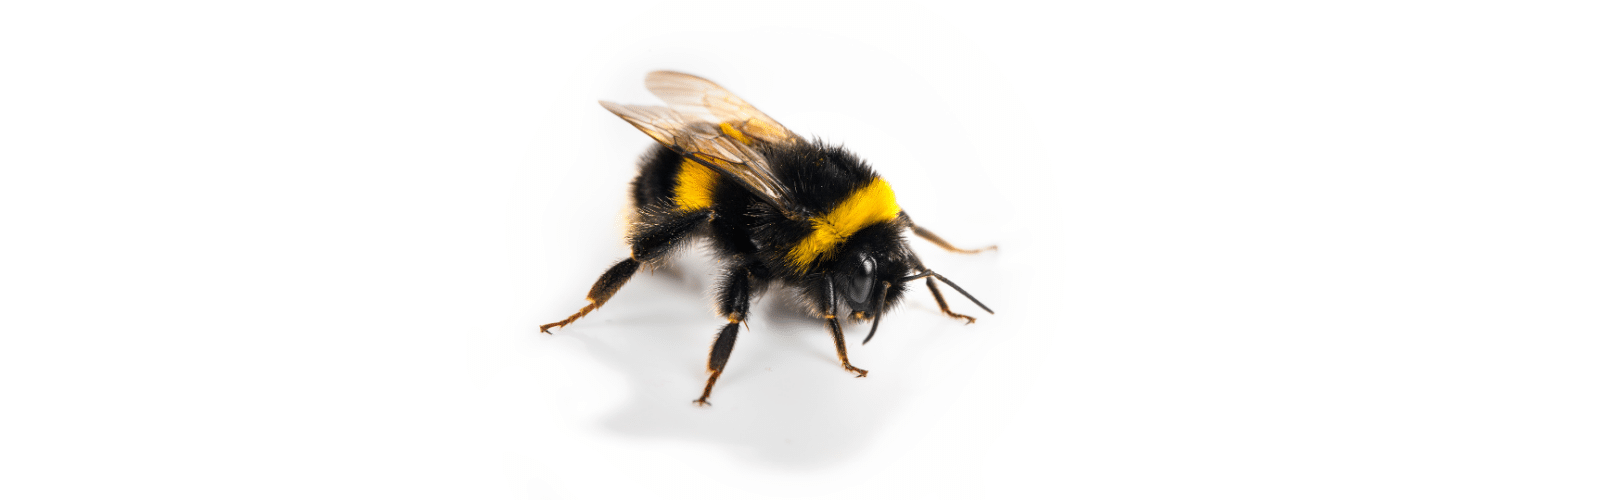 An Image of a bumble bee on a white background